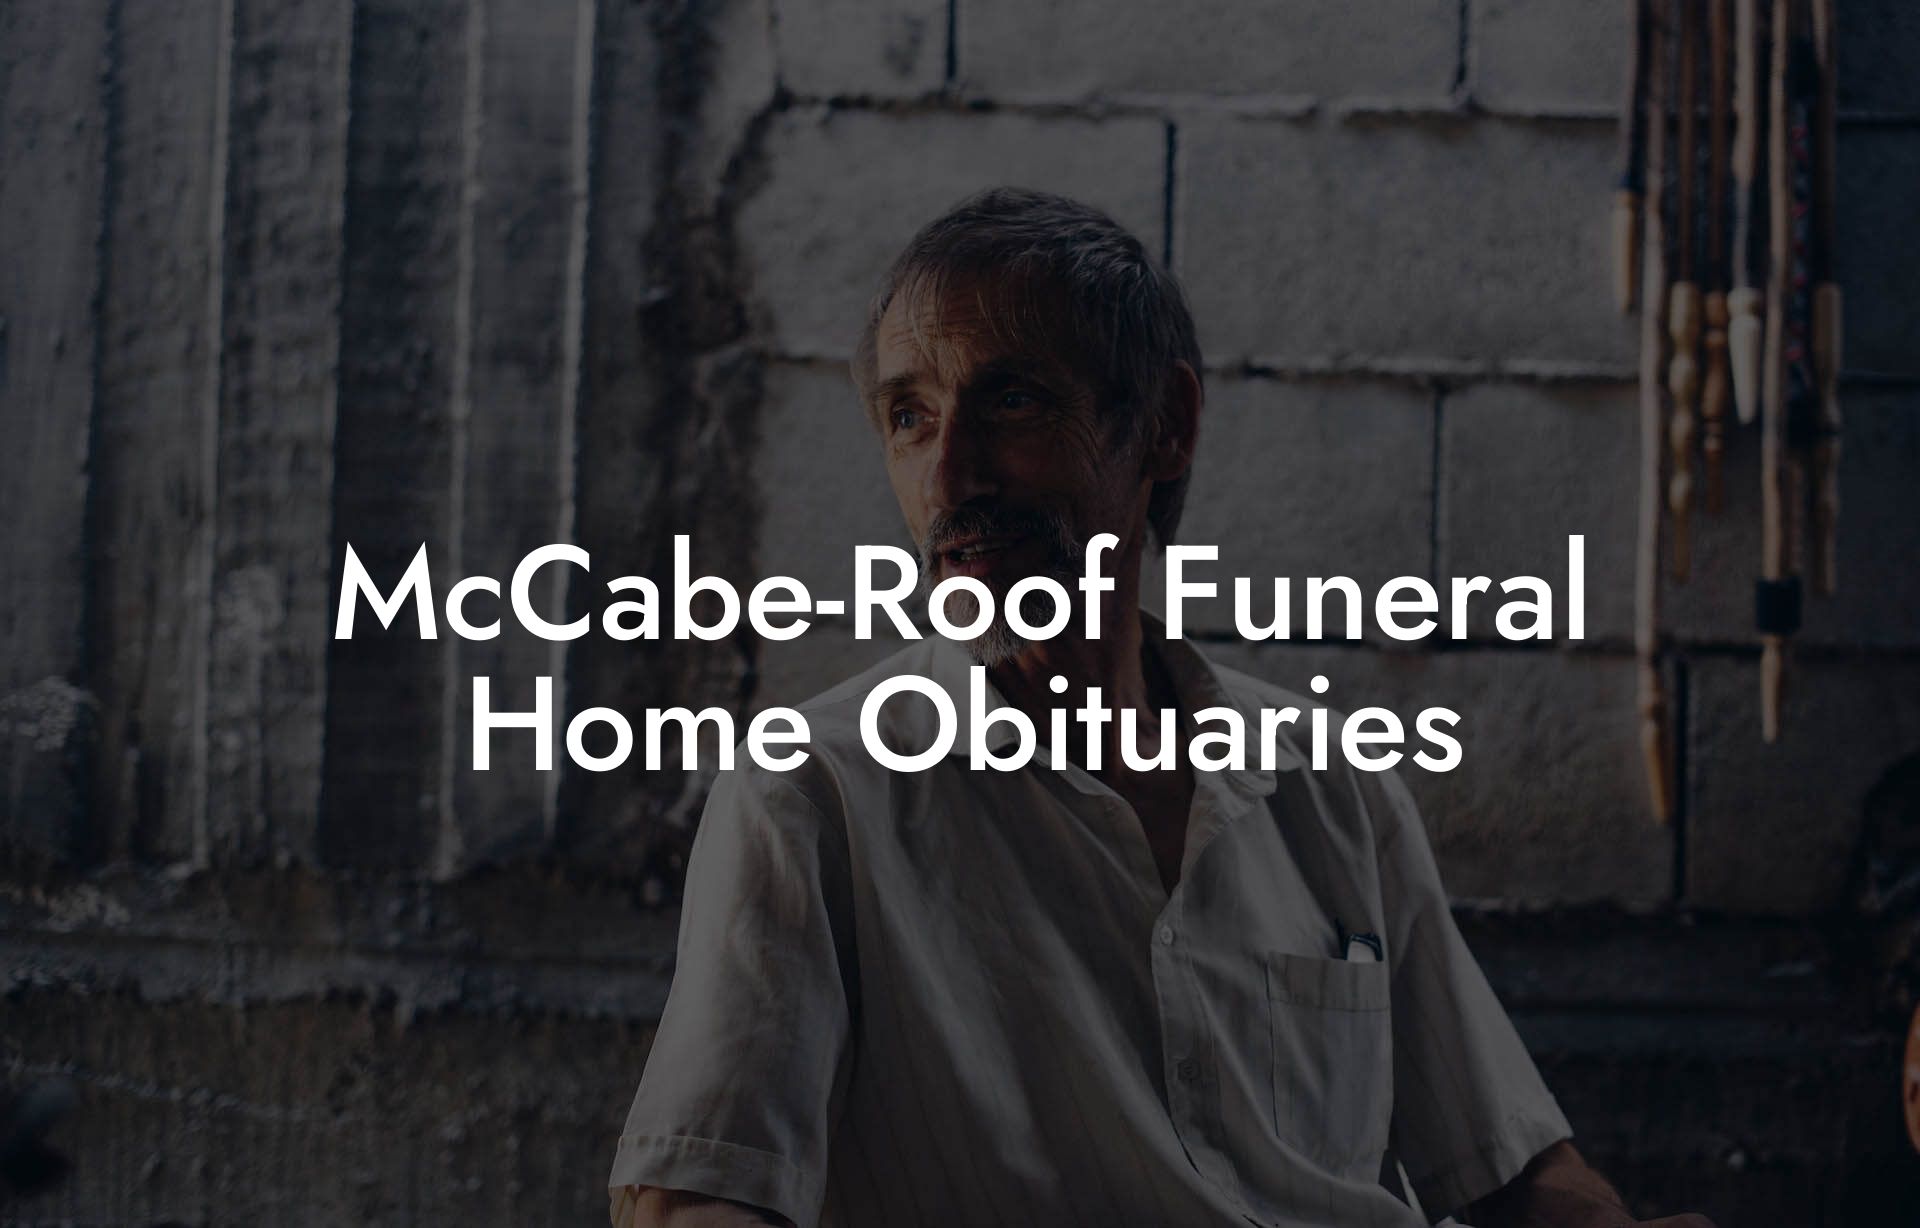 McCabe-Roof Funeral Home Obituaries